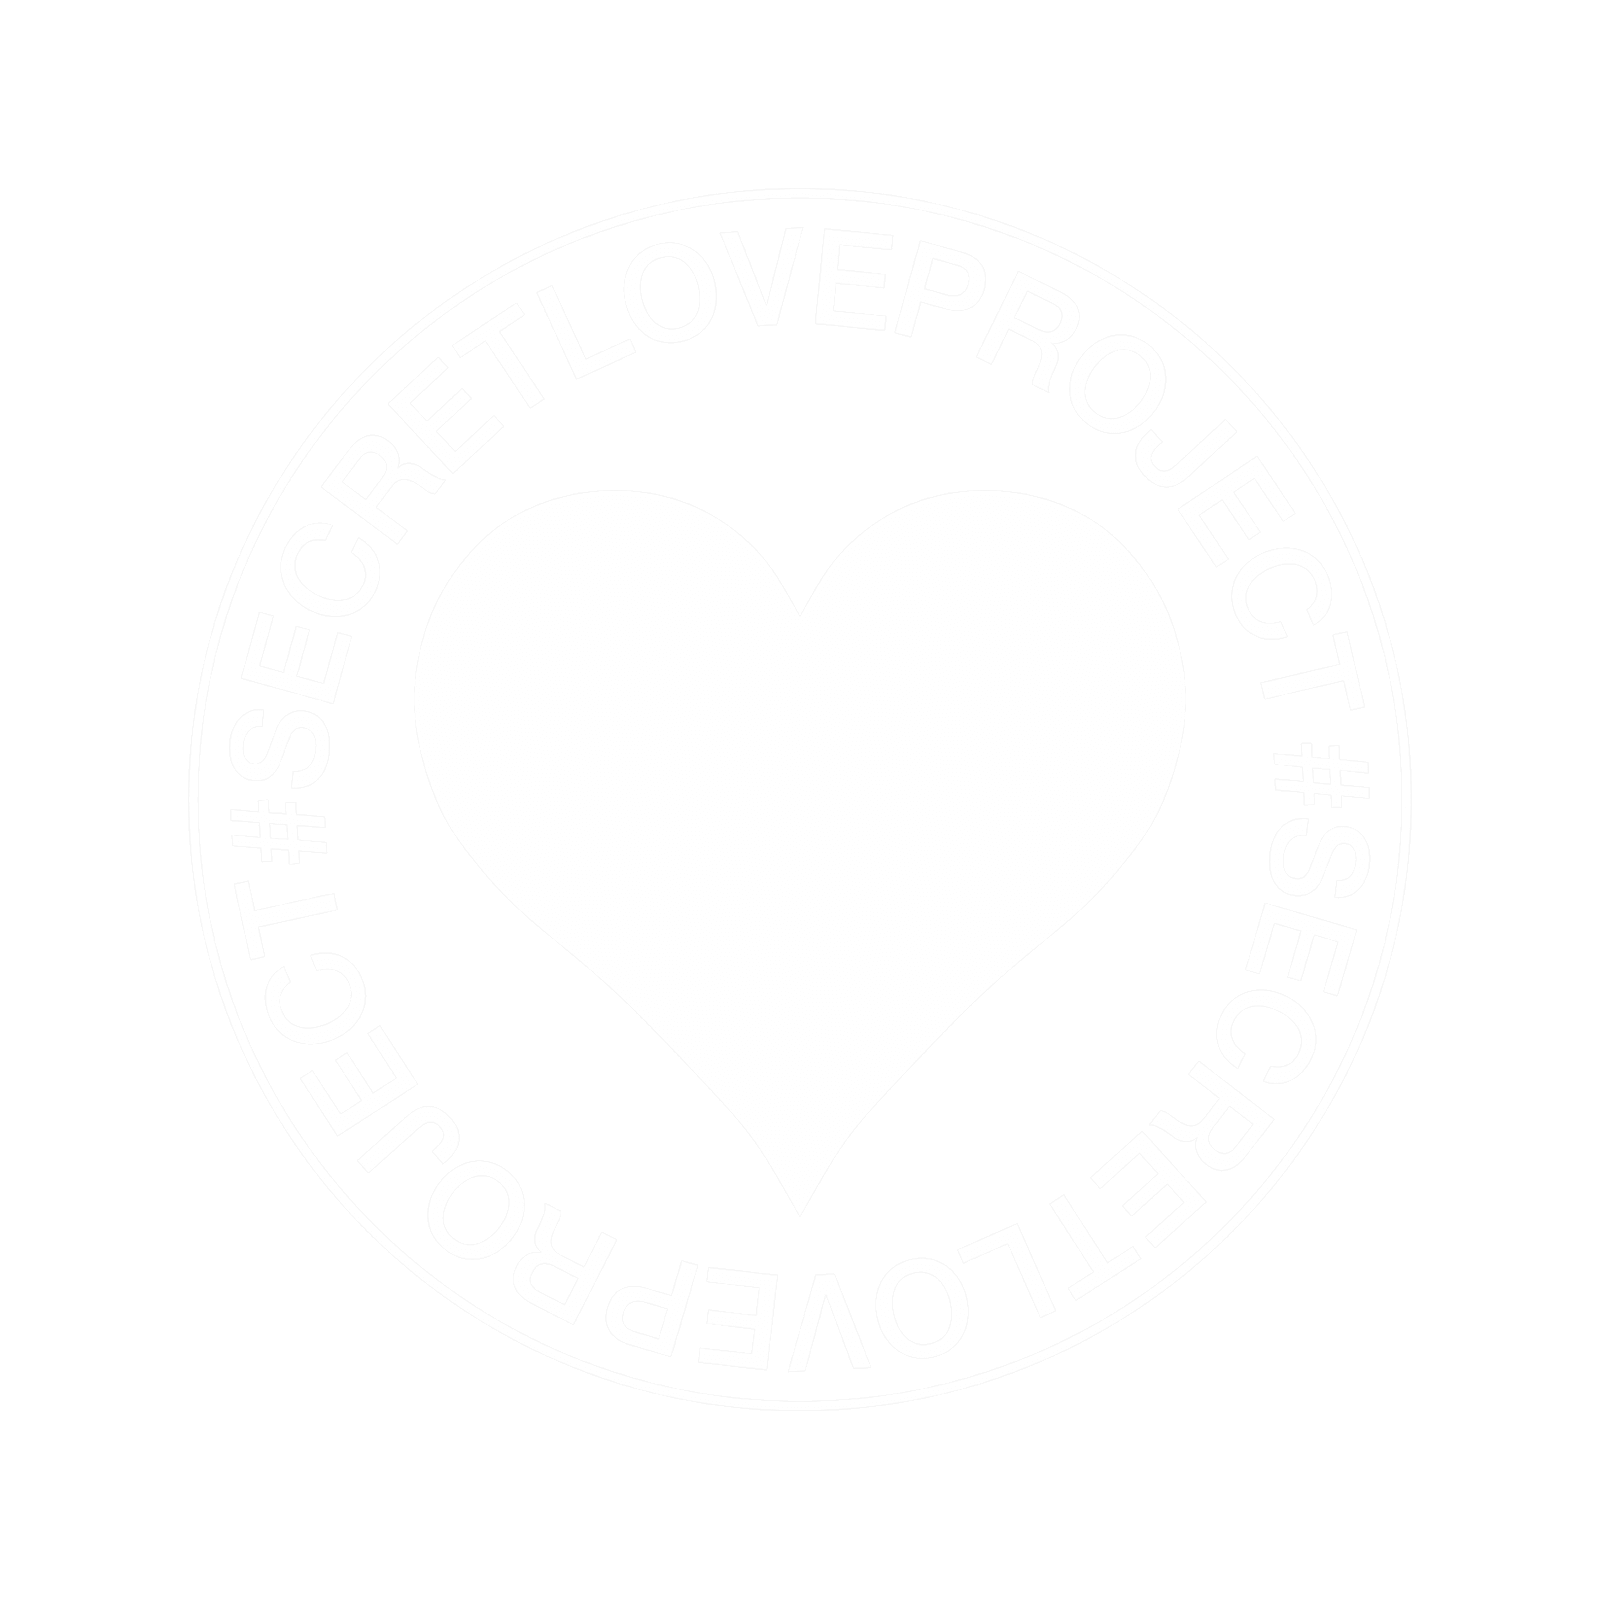 The Secret Love Project empowers the most vulnerable among us